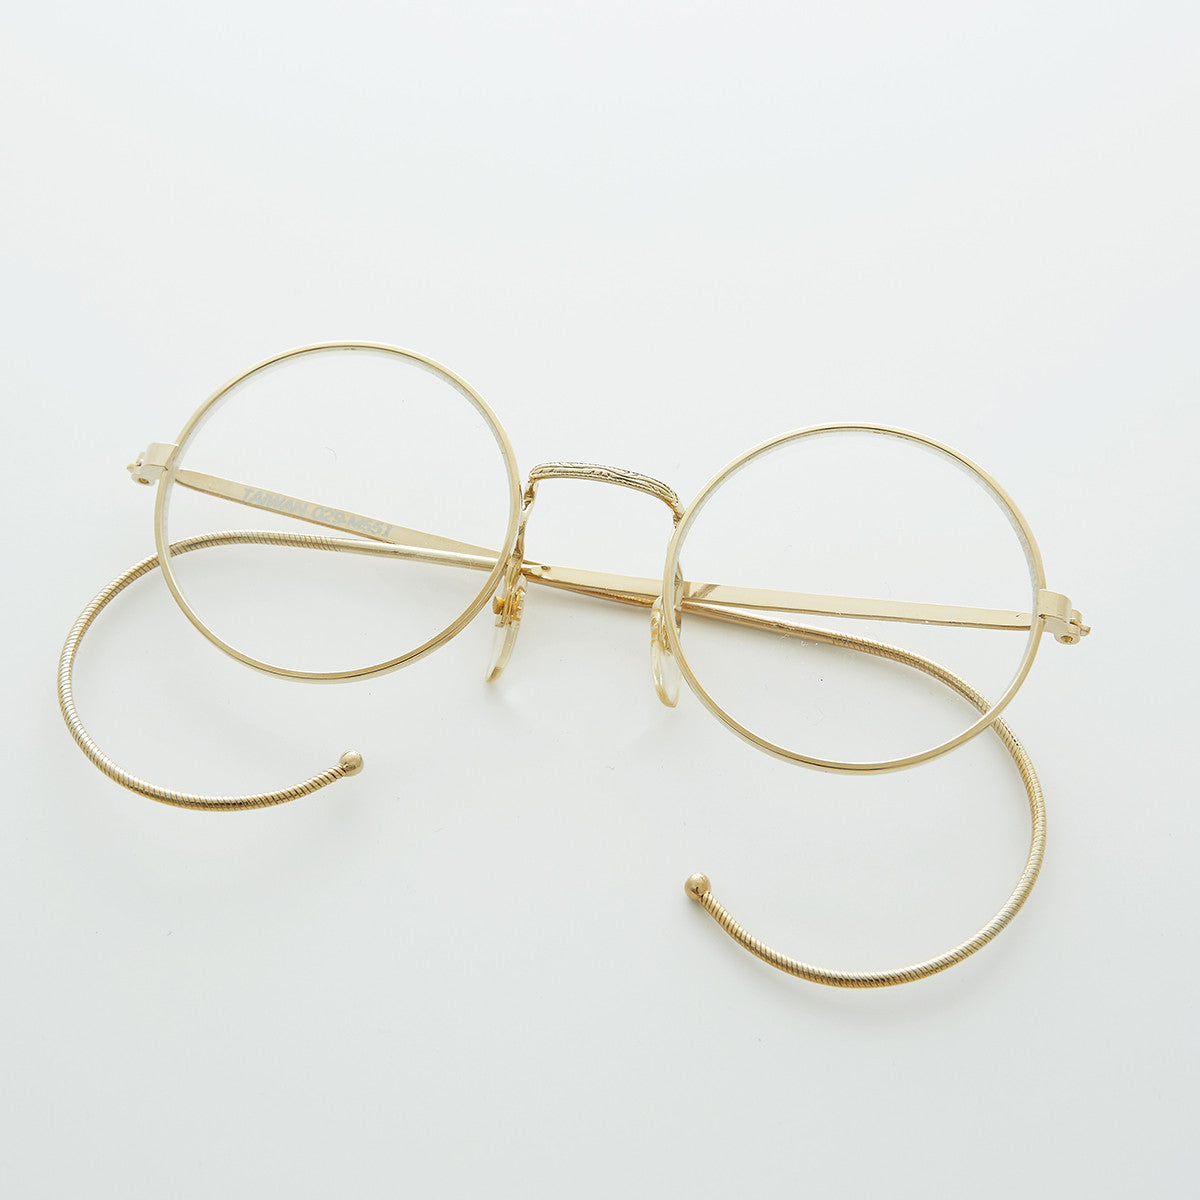 round clear lens vintage glasses with cable temples